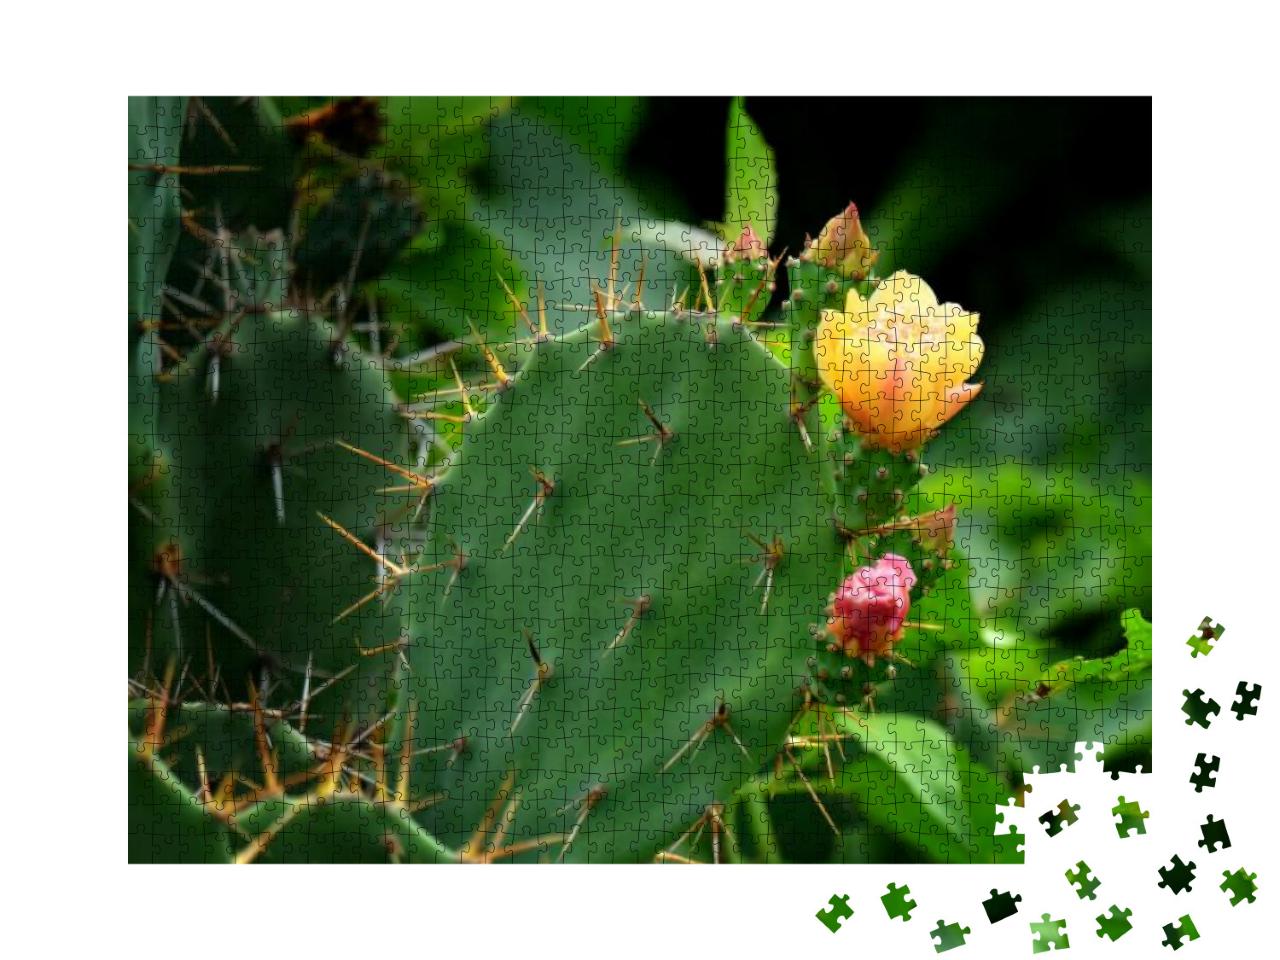 Green Pads on a Prickly Pear Cactus. Blooming Yellow Flow... Jigsaw Puzzle with 1000 pieces